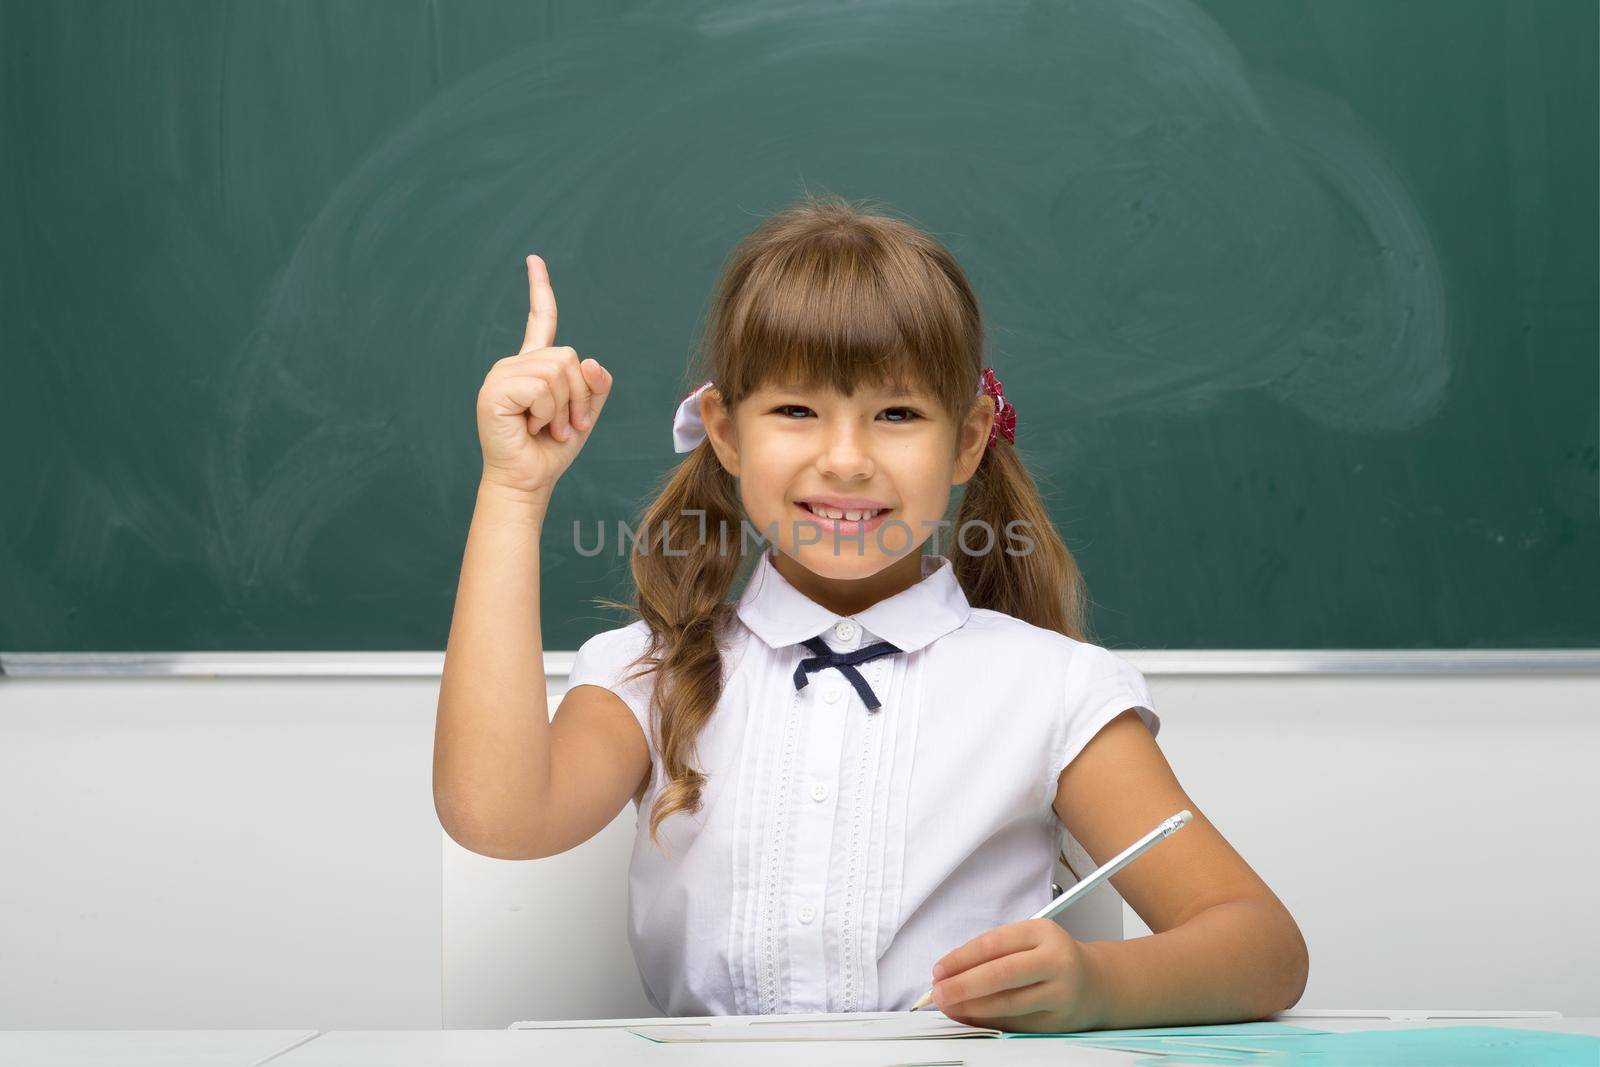 Cheerful schoolgirl pointing up her finger. Pretty girl student in white blouse sitting at desk on background of blackboard in classroom. School and education concept